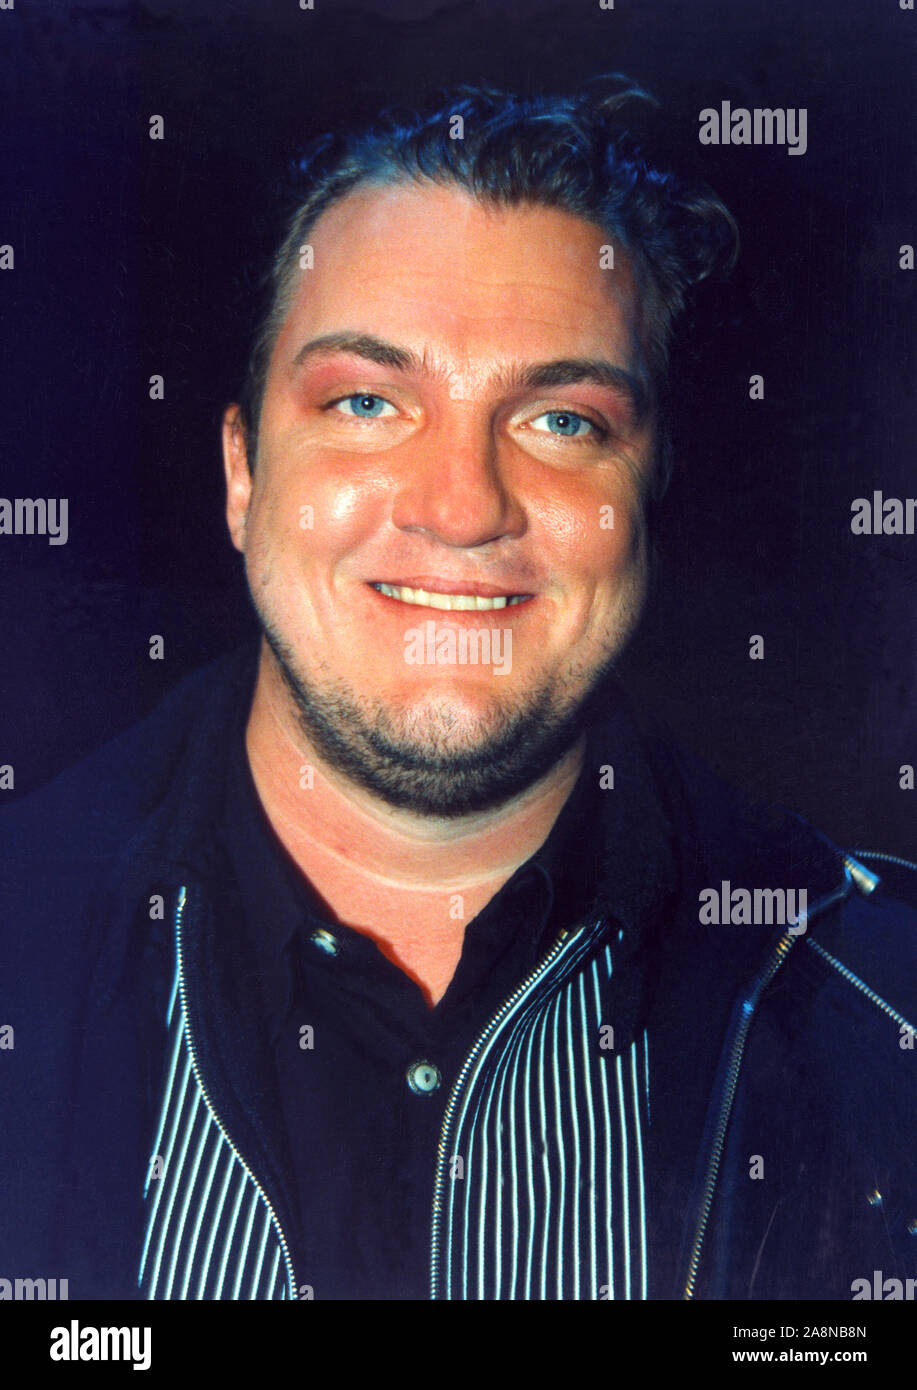 JONAS BERGGREN Ace of Base one of the founder of Swedish Group Ace of Bace  Stock Photo - Alamy